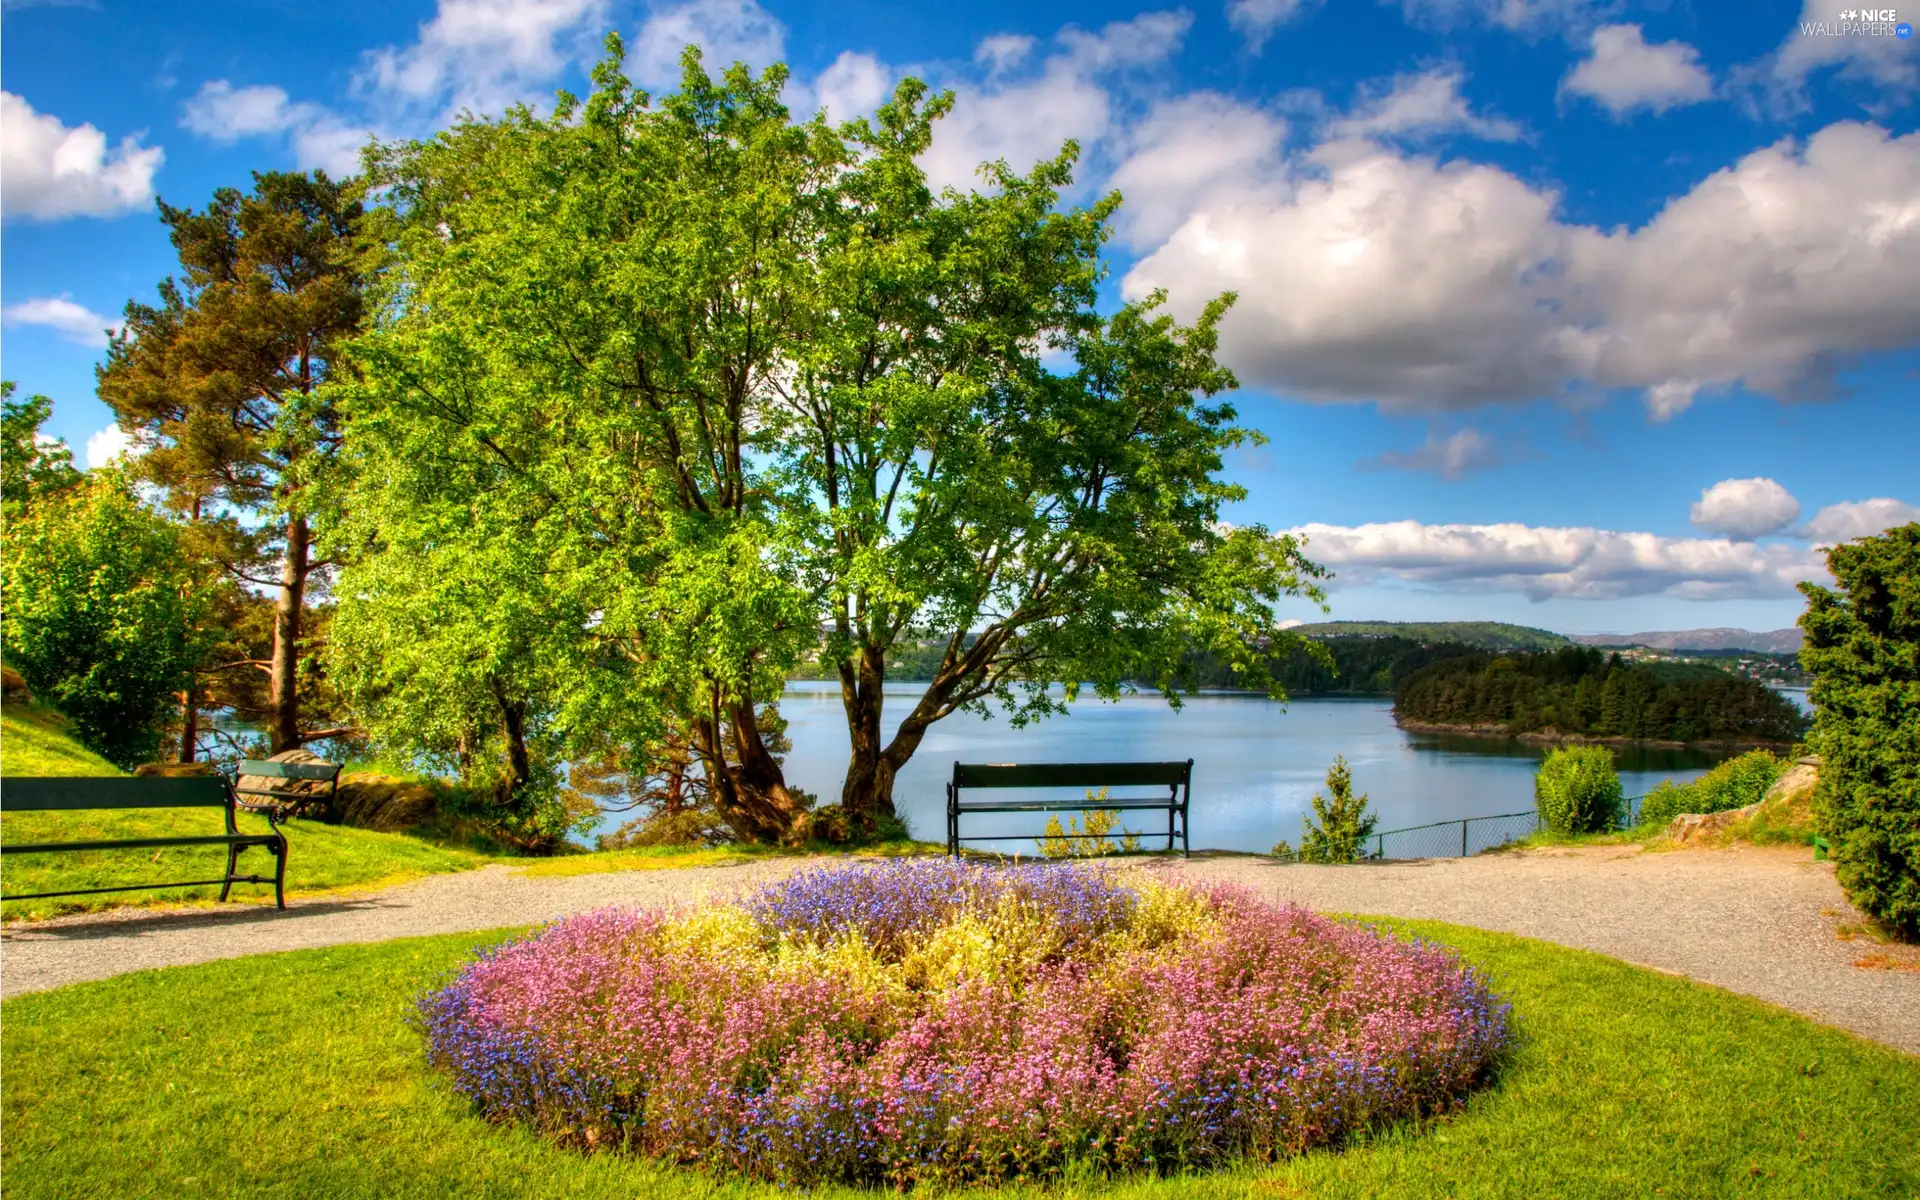 bench, Mountains, flowerbed, Flowers, lake